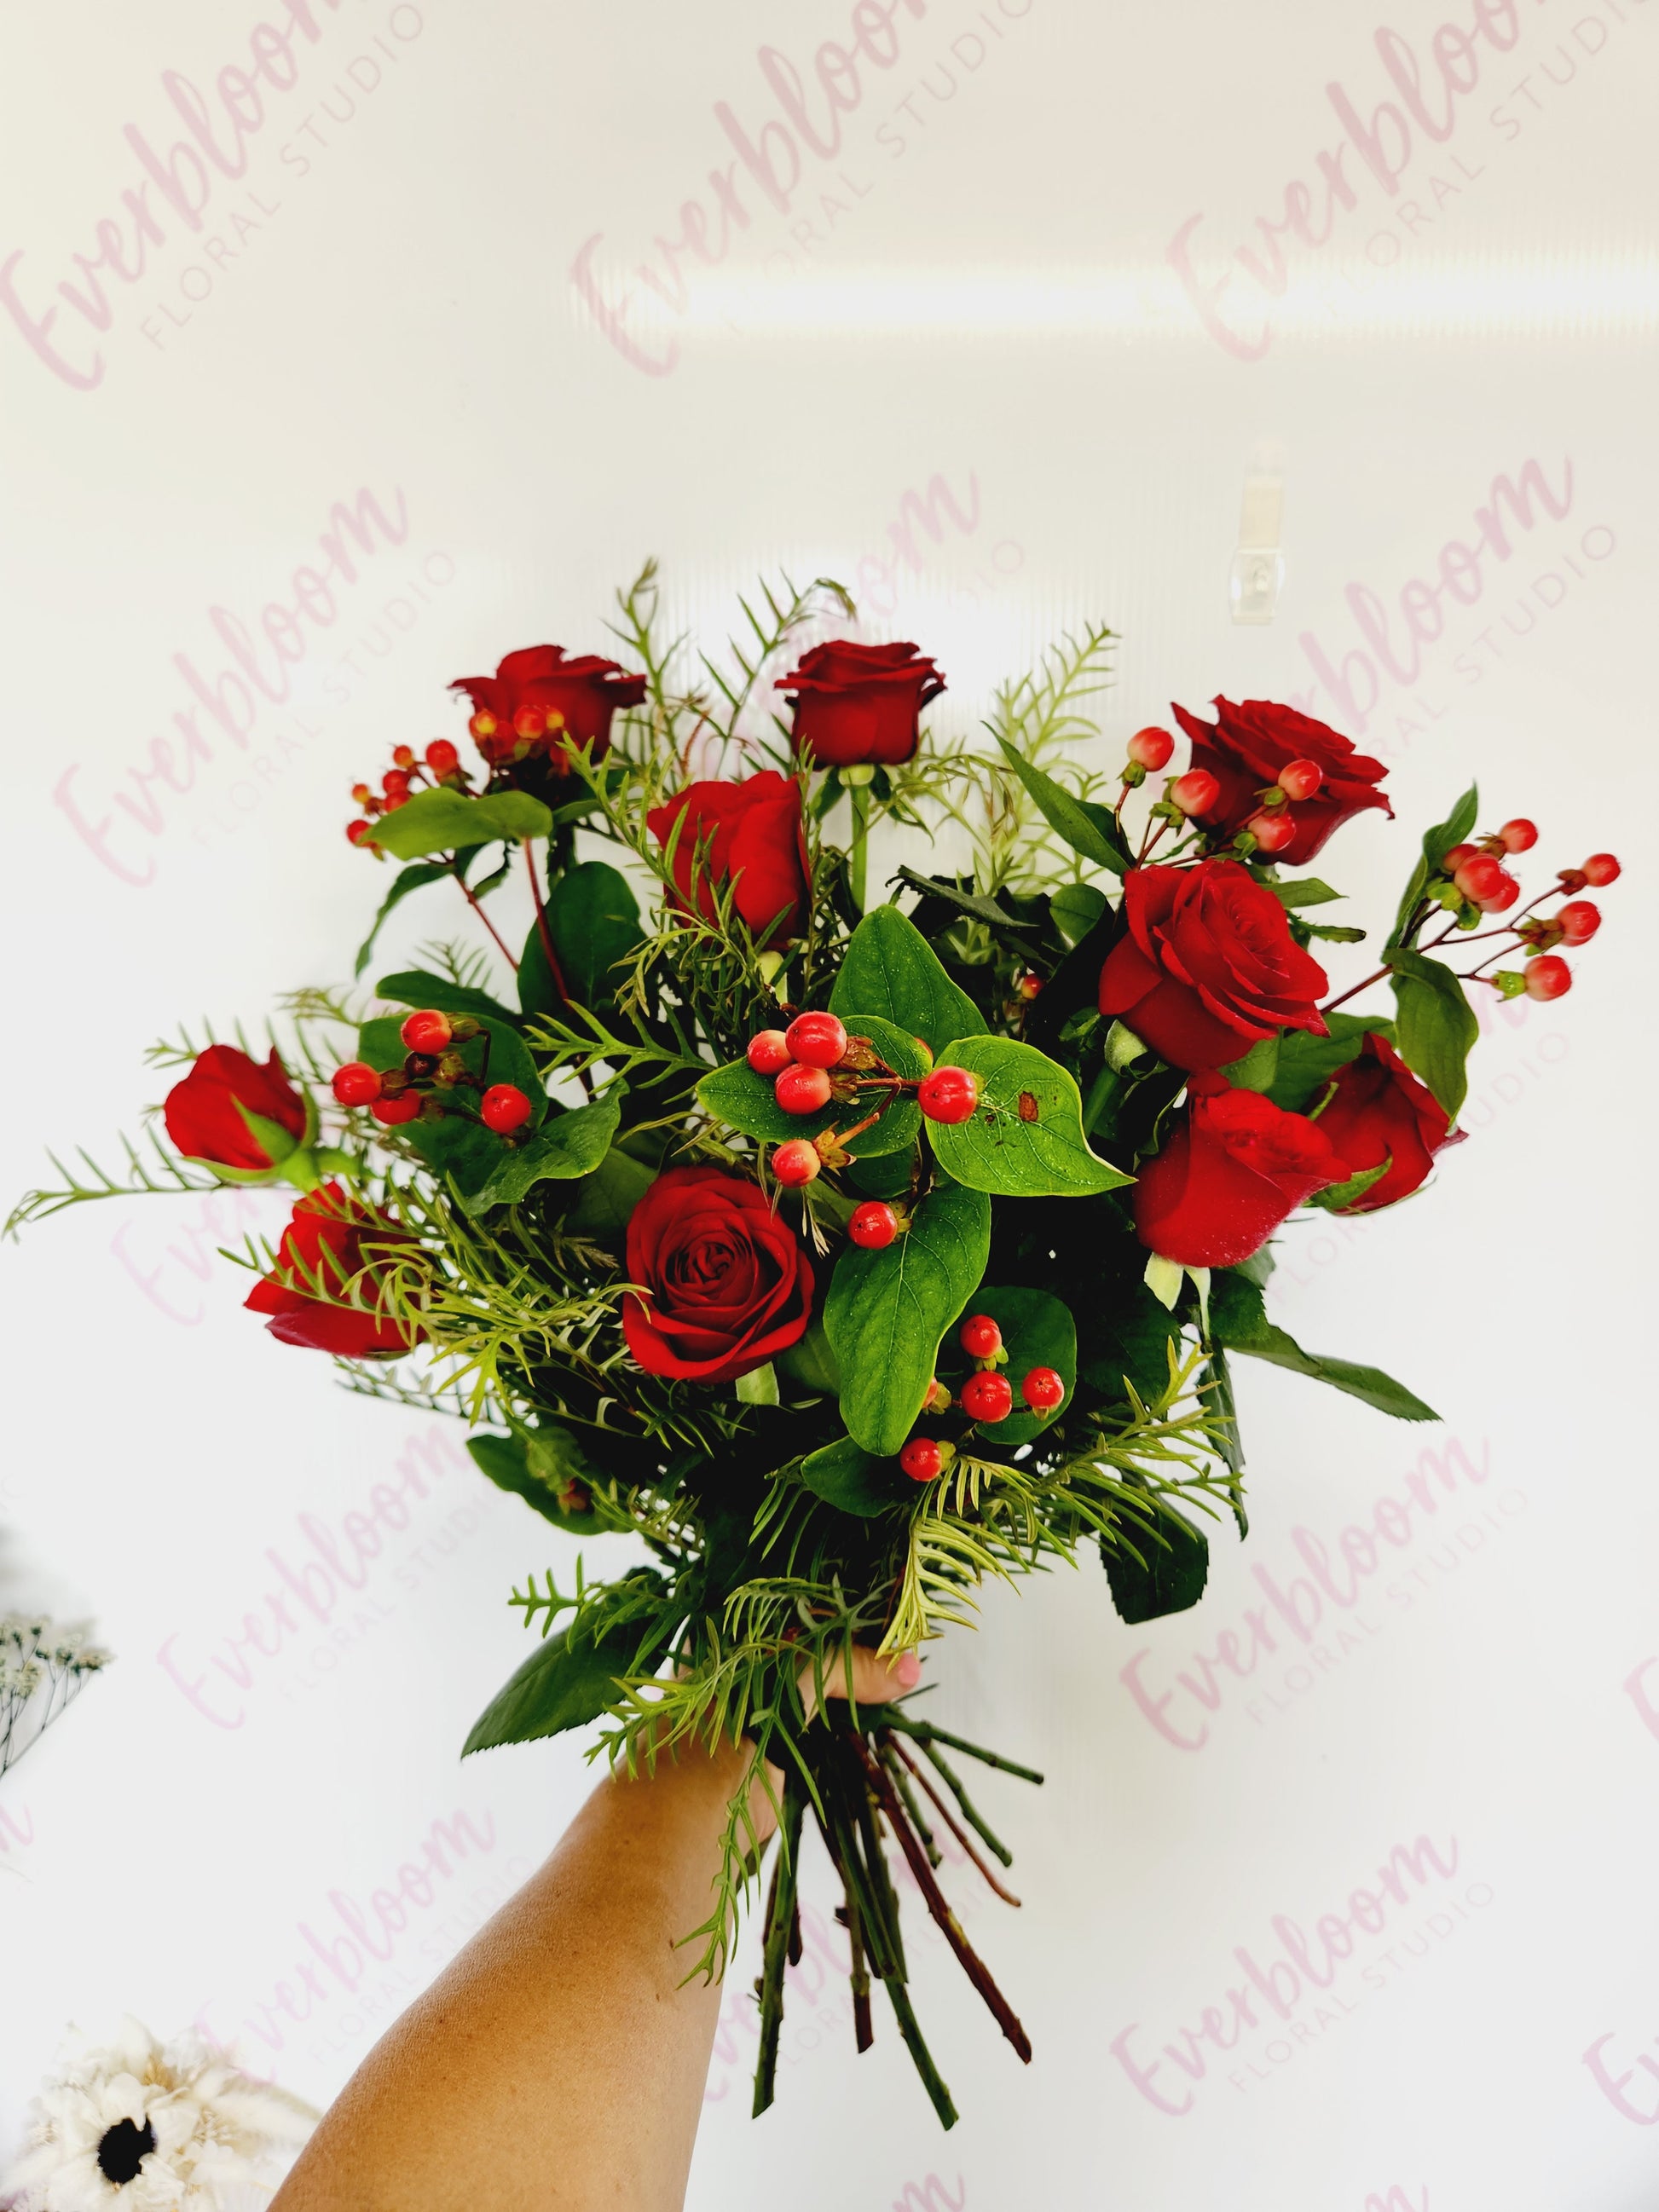 Dozen red roses for all special occasions, anniversaries, love, valentines day. Everbloom Floral Studio - Mount Maunganui and Papamoa Florist